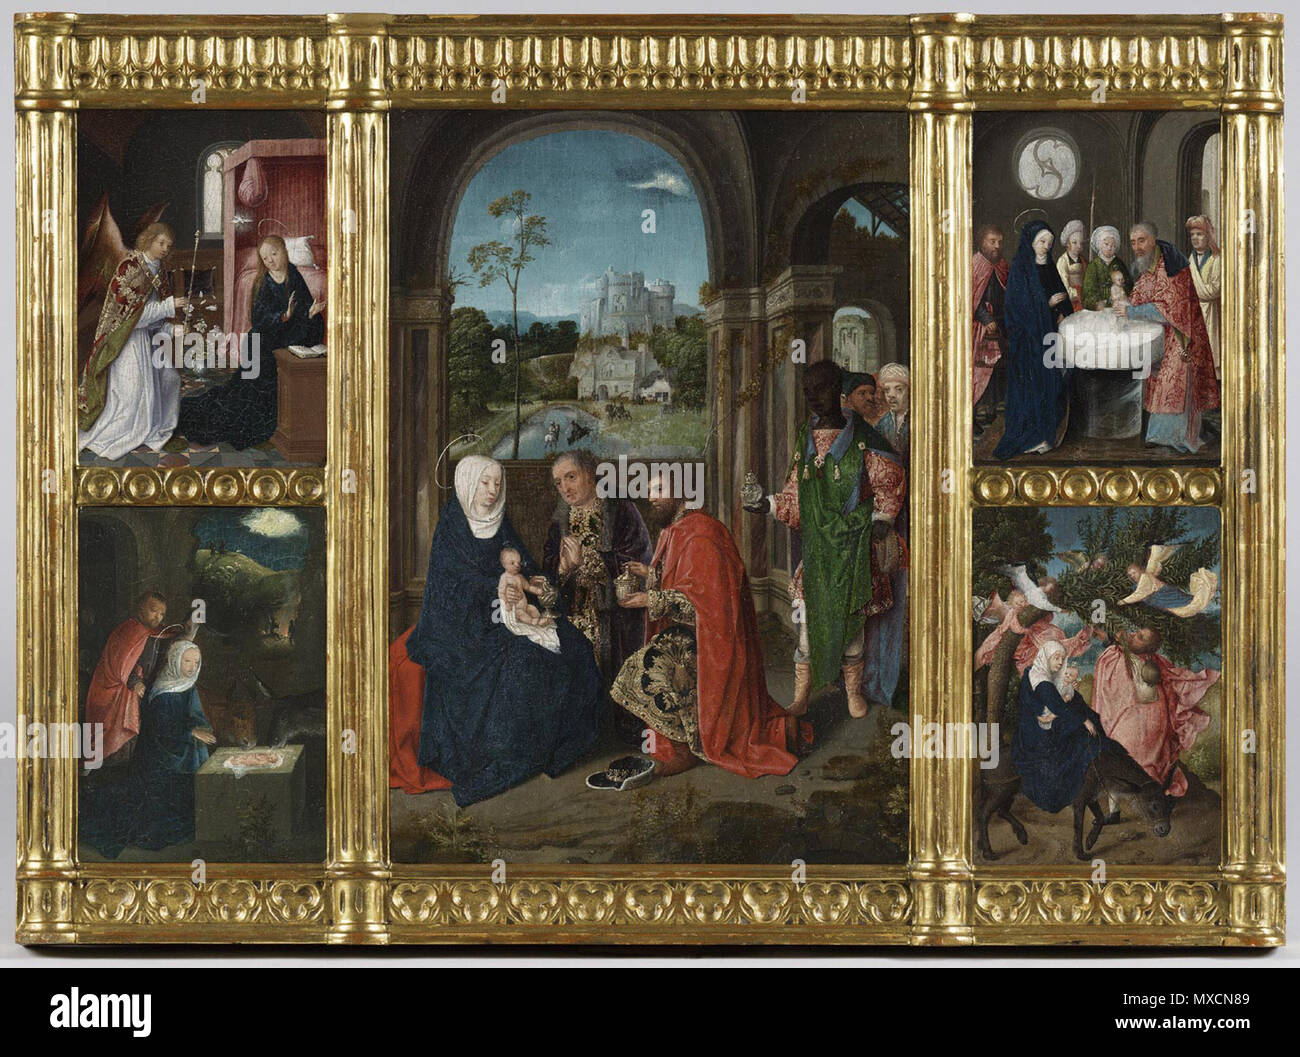 . Italiano: Altarpiece showing scenes from the Infancy of Christ: The Adoration of the Magi [center]; The Annunciation; The Presentation of Christ in the Temple; The Flight into Egypt; The Nativity [clockwise from upper left] Overall: 12 1/2 x 19 5/8 inches (31.8 x 49.8 cm) Central panel: 12 1/2 x 7 3/8 inches (31.8 x 18.7 cm) Outer panel, top left: 6 1/8 x 4 3/4 inches (15.6 x 12.1 cm) Outer panel, bottom left: 6 1/8 x 4 5/16 inches (15.6 x 11 cm) Outer panel, top right: 6 1/8 x 4 1/4 inches (15.6 x 10.8 cm) Outer panel, bottom right: 6 1/8 x 4 5/16 inches (15.6 x 12.5 cm) Oil on panel . 26 J Stock Photo